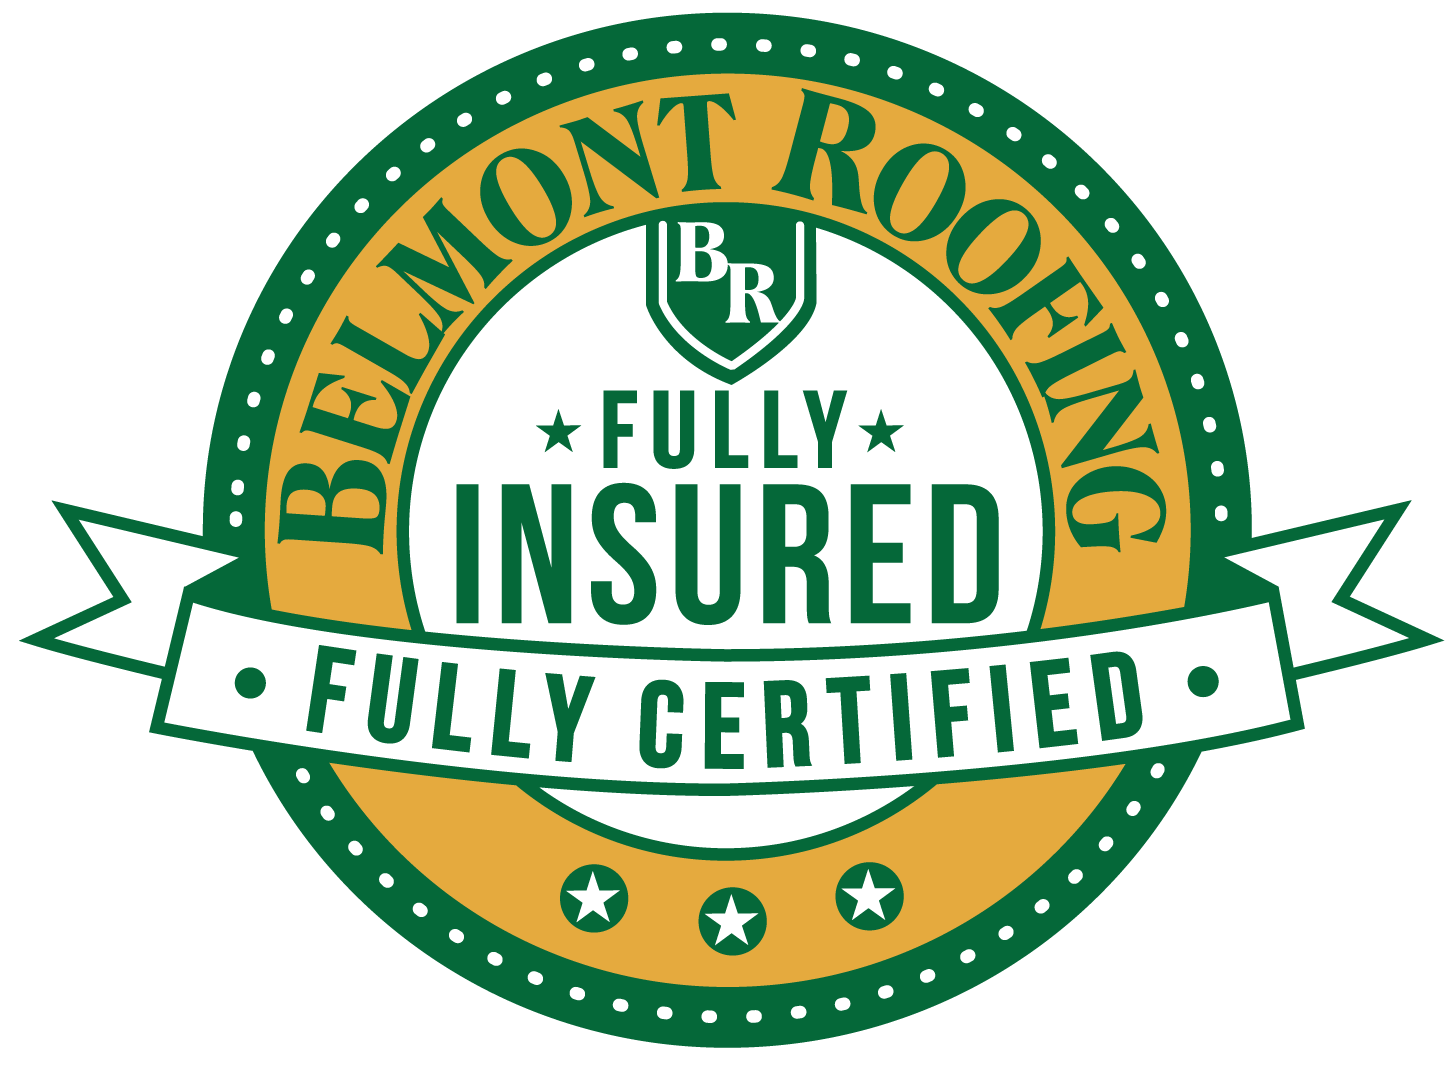 Belmont Roofing Fully Insured and Certified logo